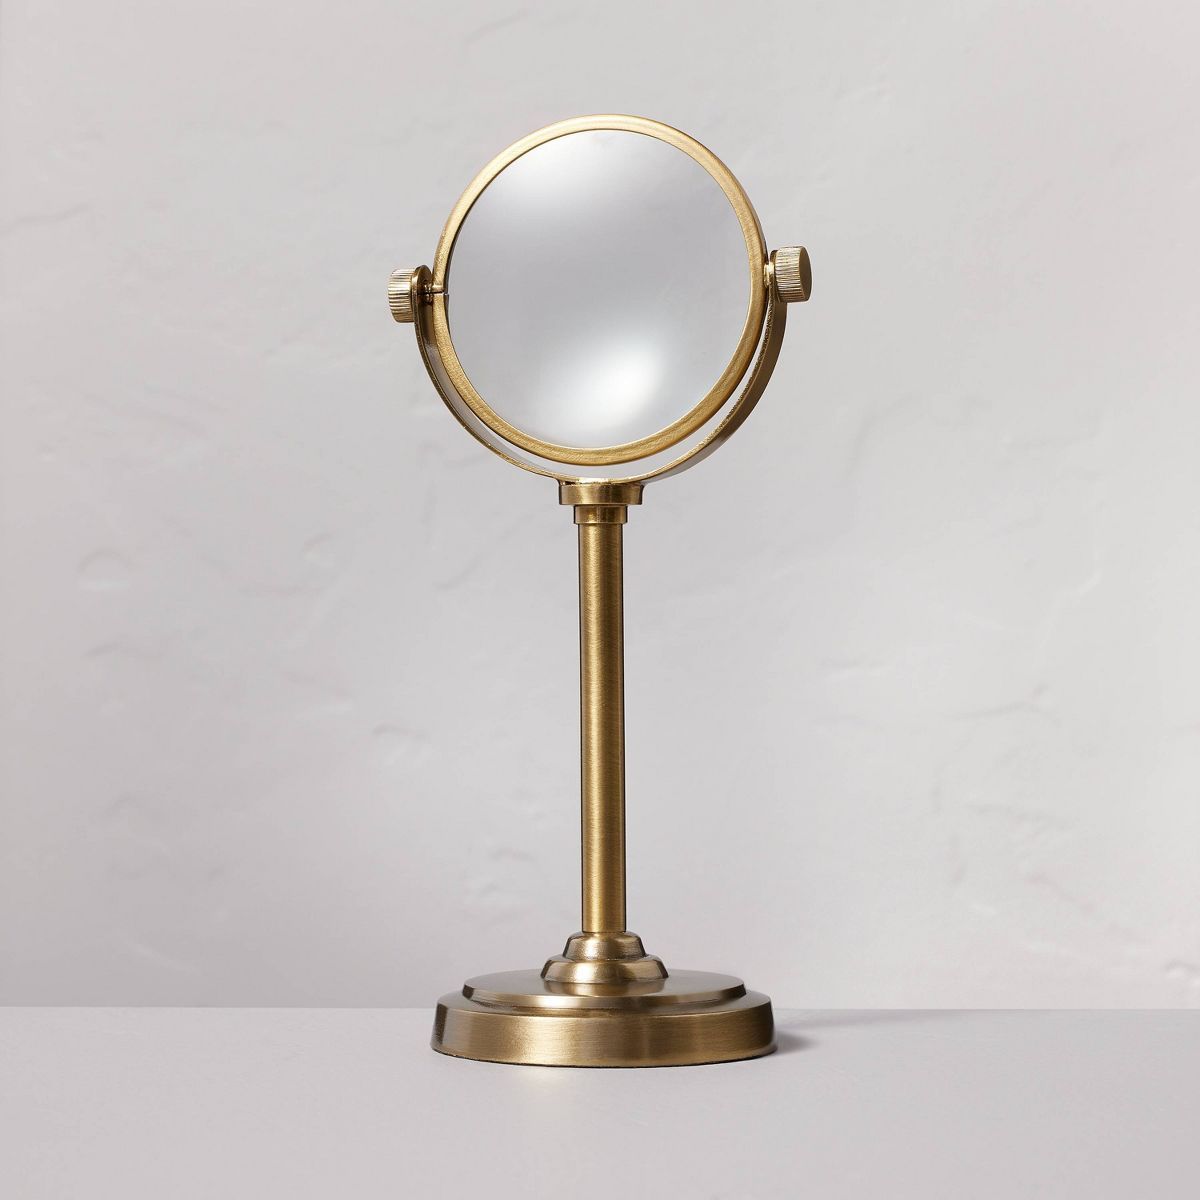 8" Decorative Brass Magnifying Glass - Hearth & Hand™ with Magnolia | Target